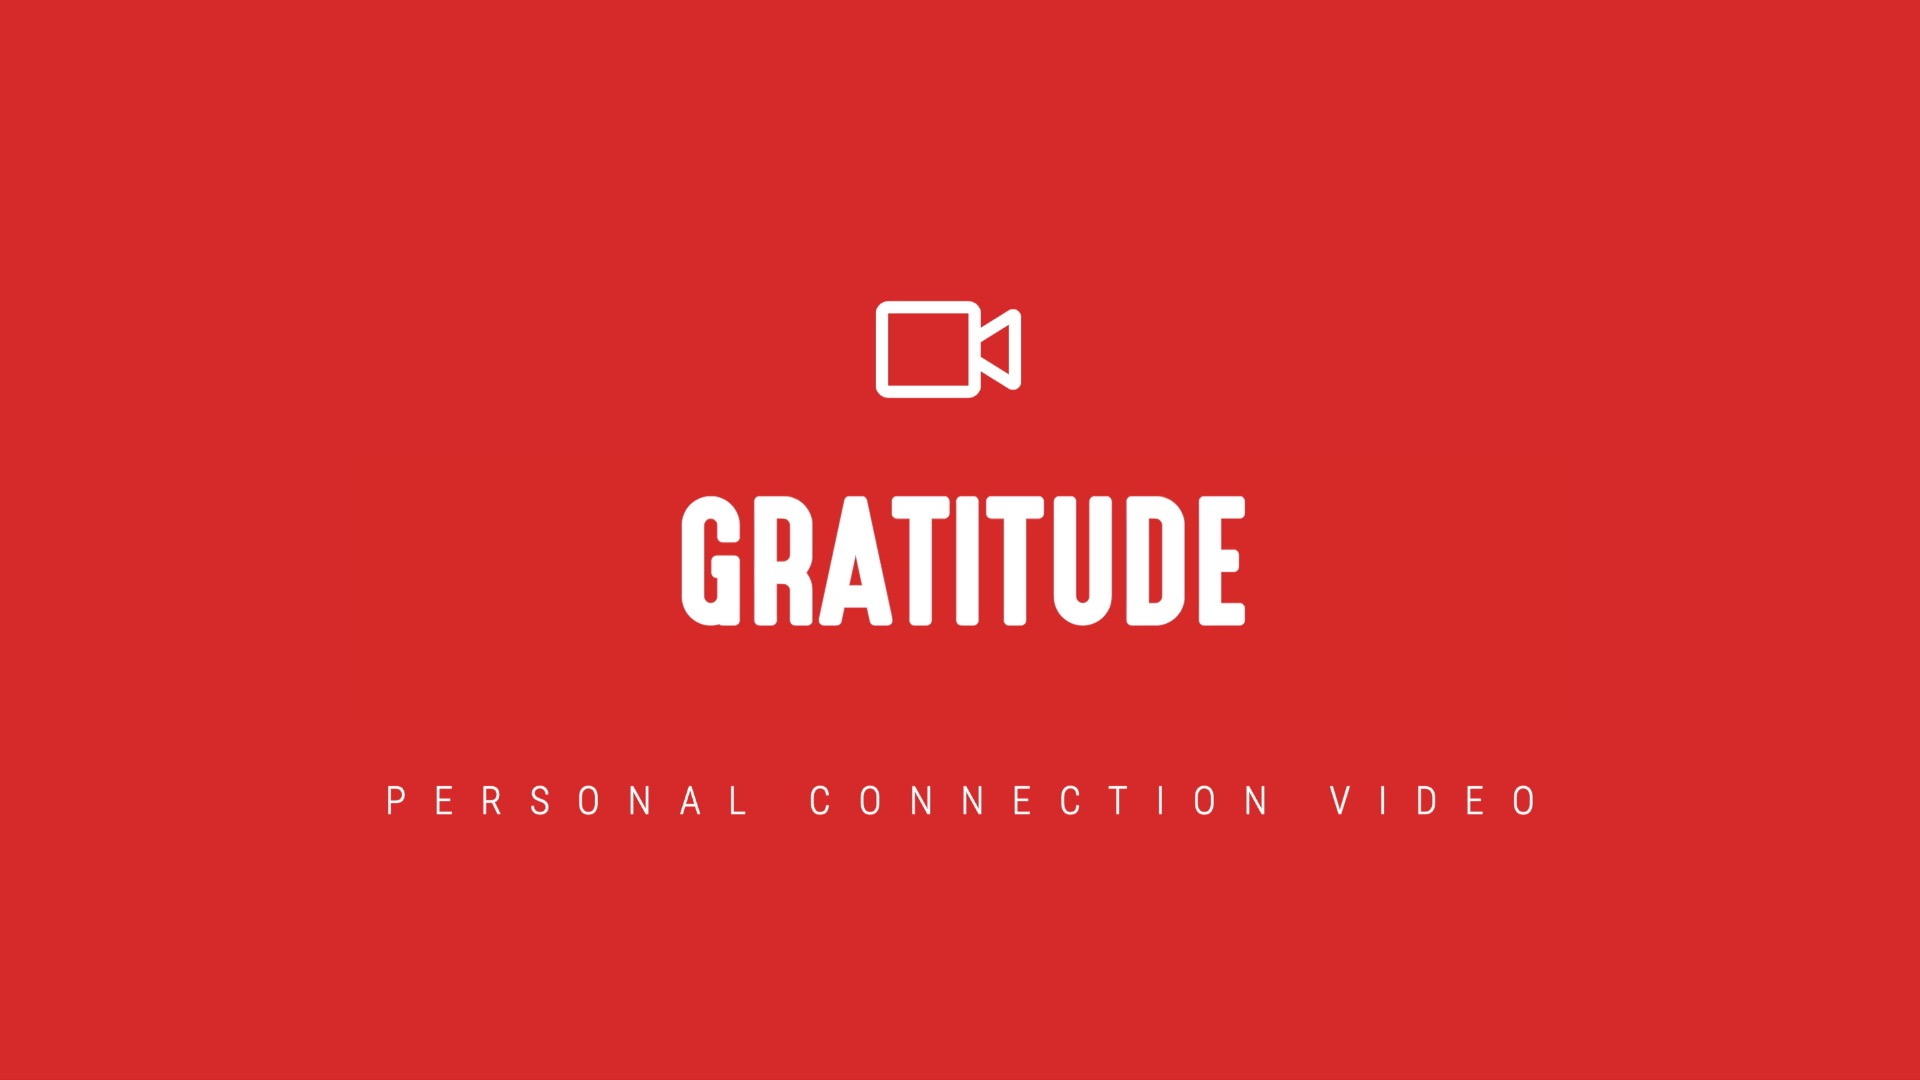 [NEW] Personal Connection Video – Gratitude